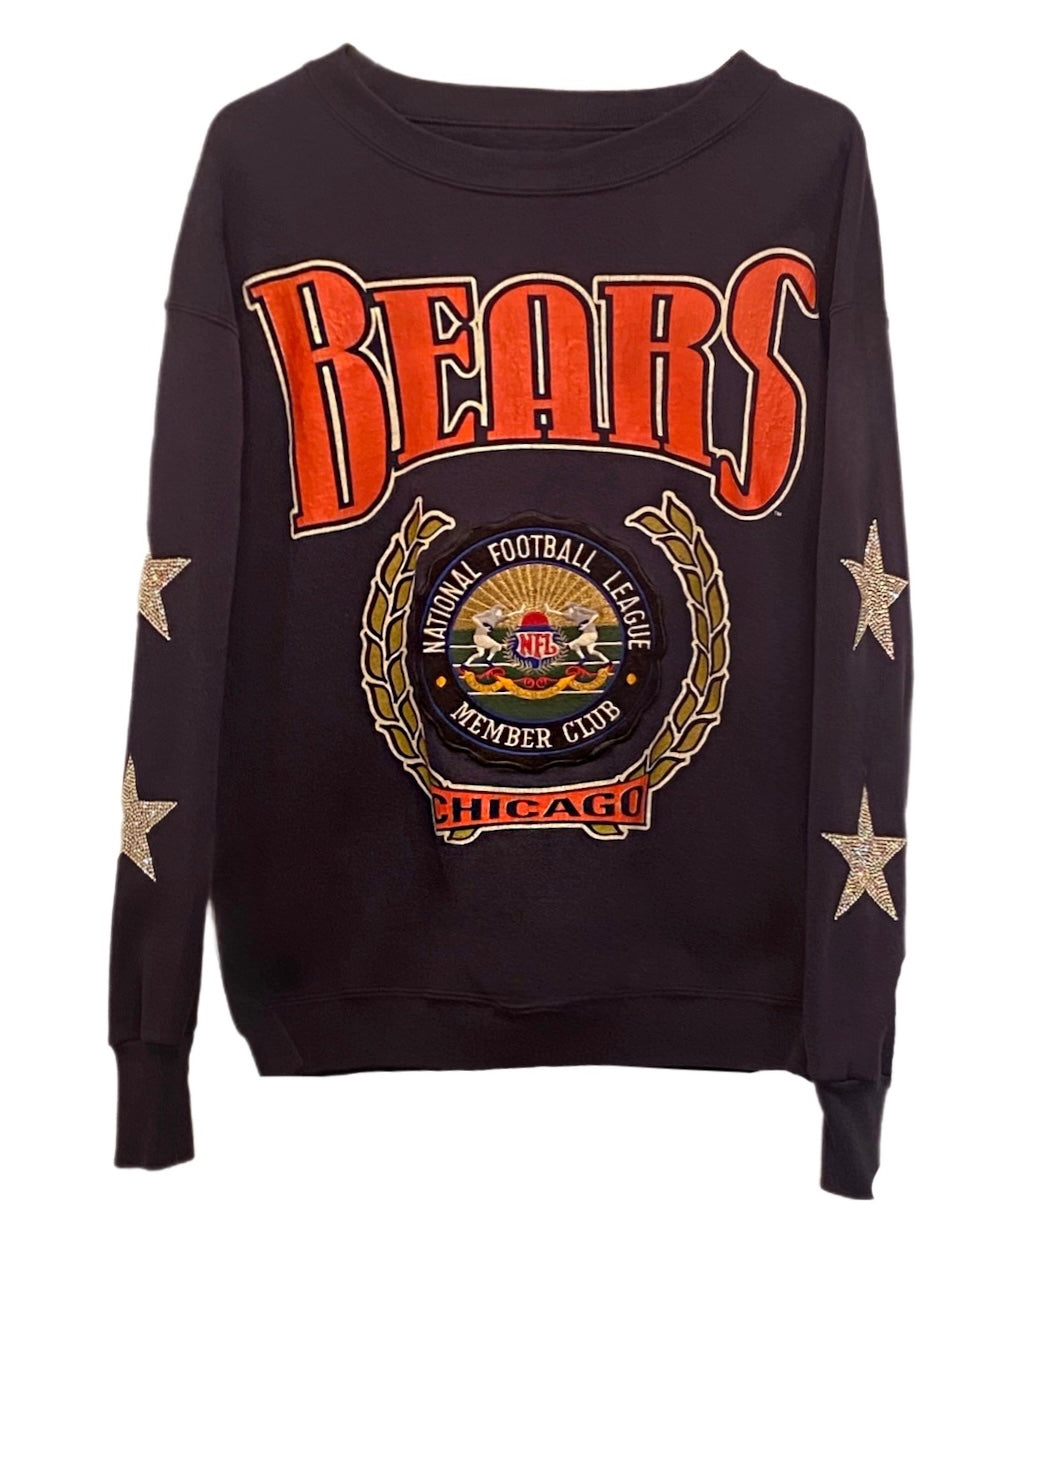 ShopCrystalRags Chicago Bears, NFL One of A Kind Vintage Sweatshirt with Crystal Star Design